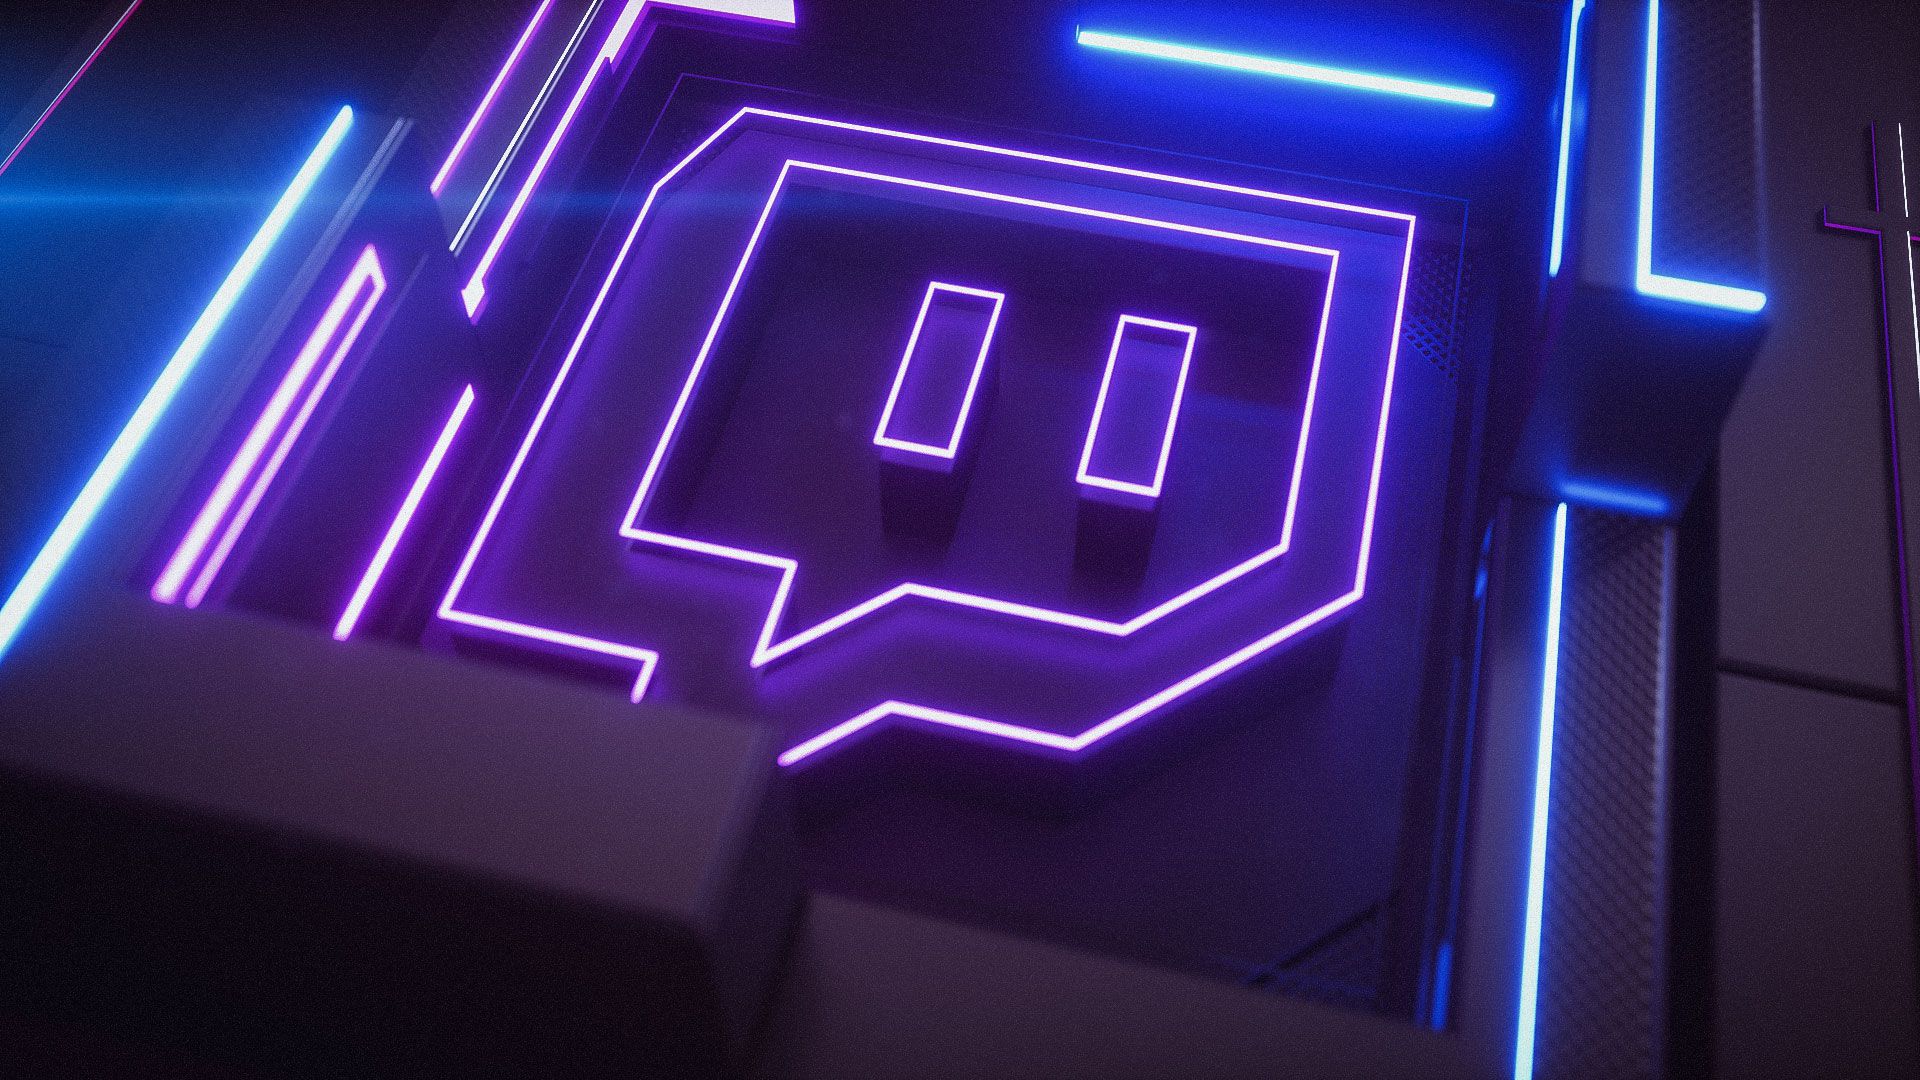 Twitch Wallpapers